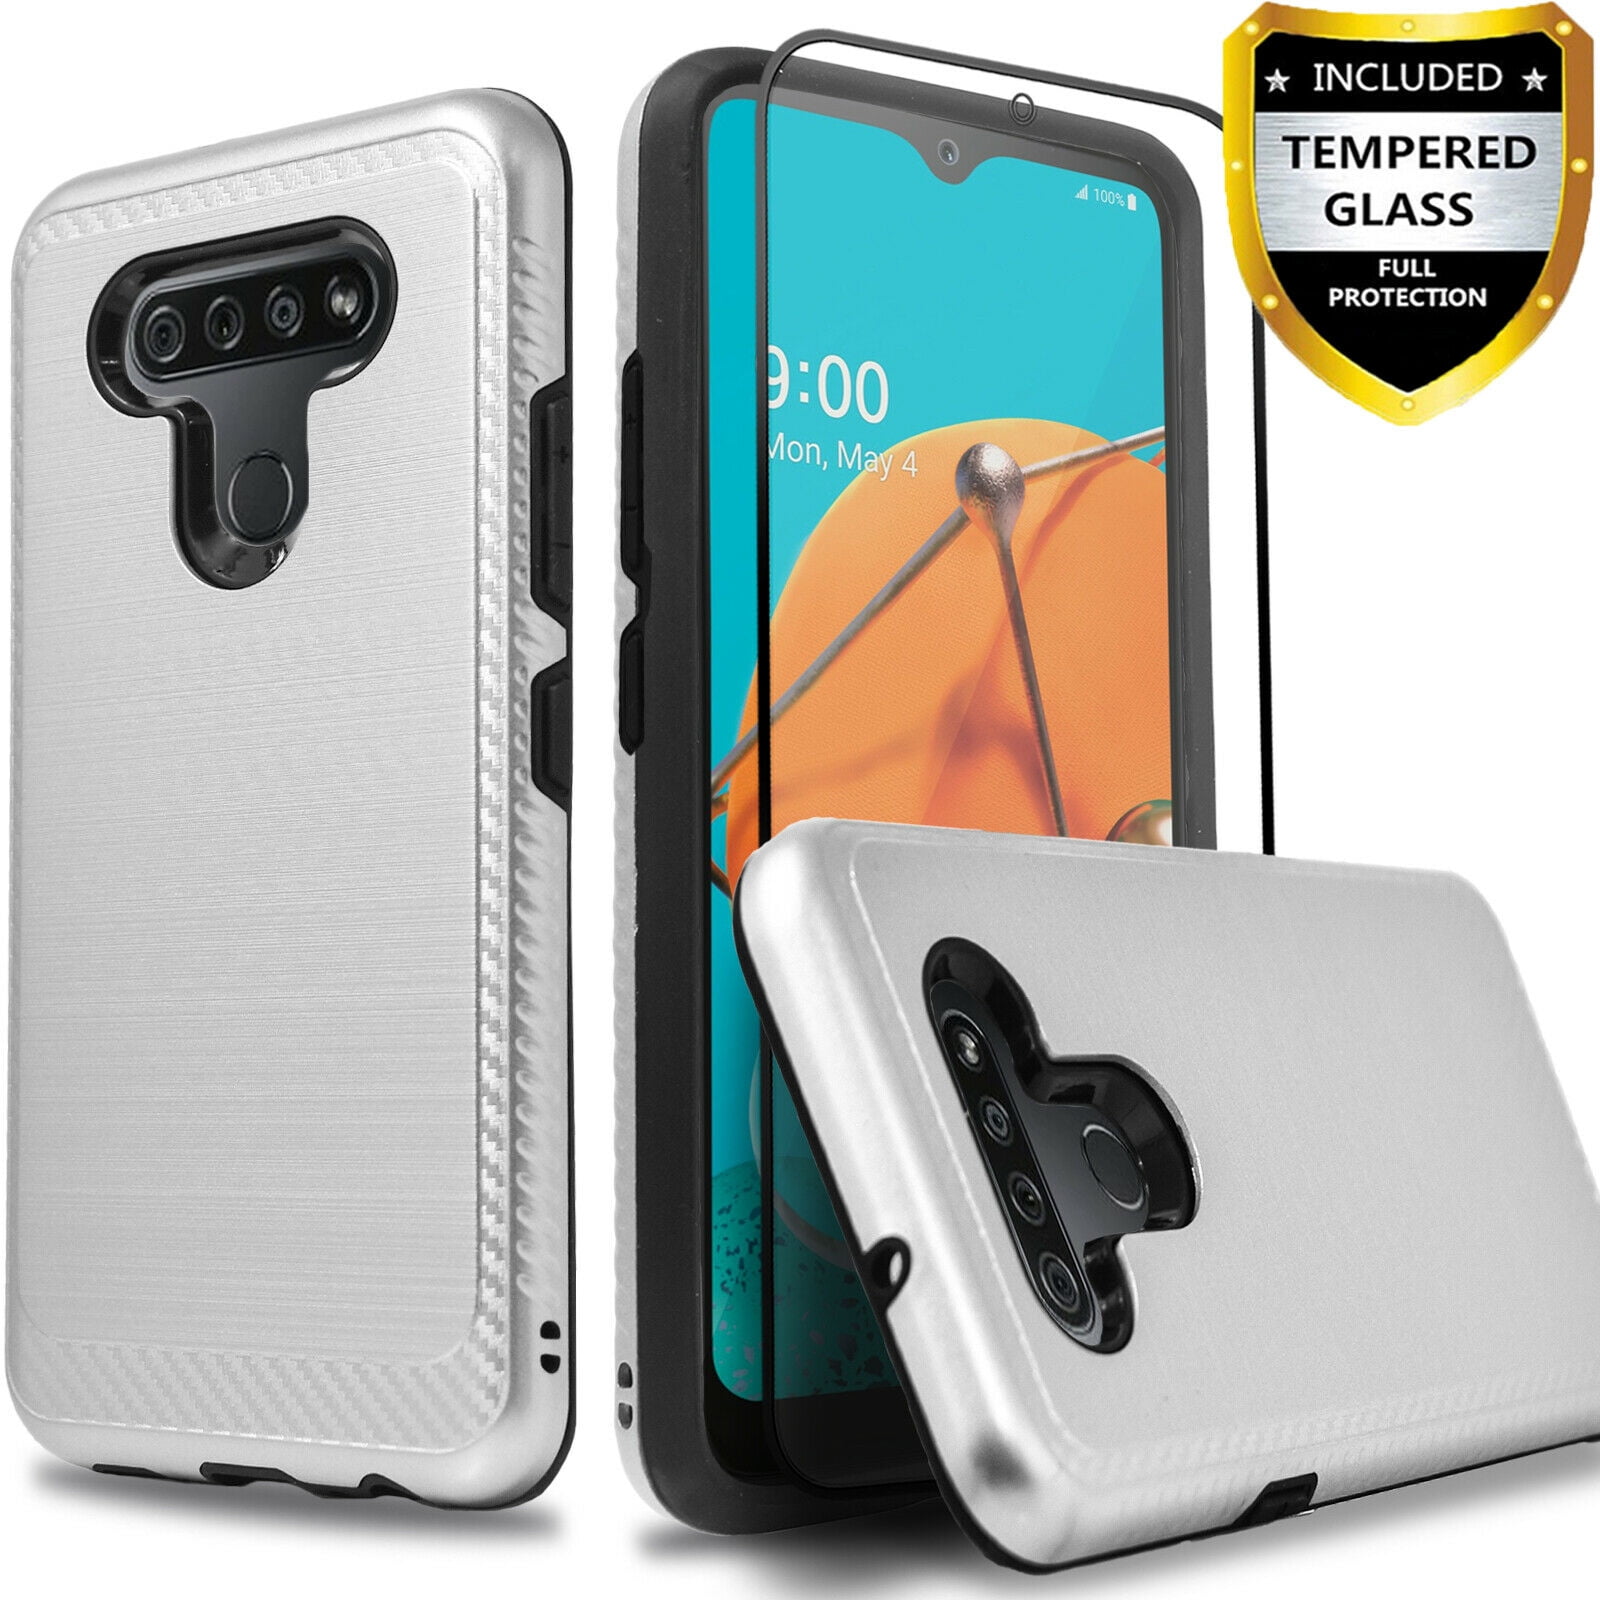 LG K51 Phone Case, LG Reflect (LM-K500) Case, [NOT FIT LG K50] 2-Piece  Style Hybrid Shockproof Hard Case Cover with [Temerped Glass Screen  Protector] 